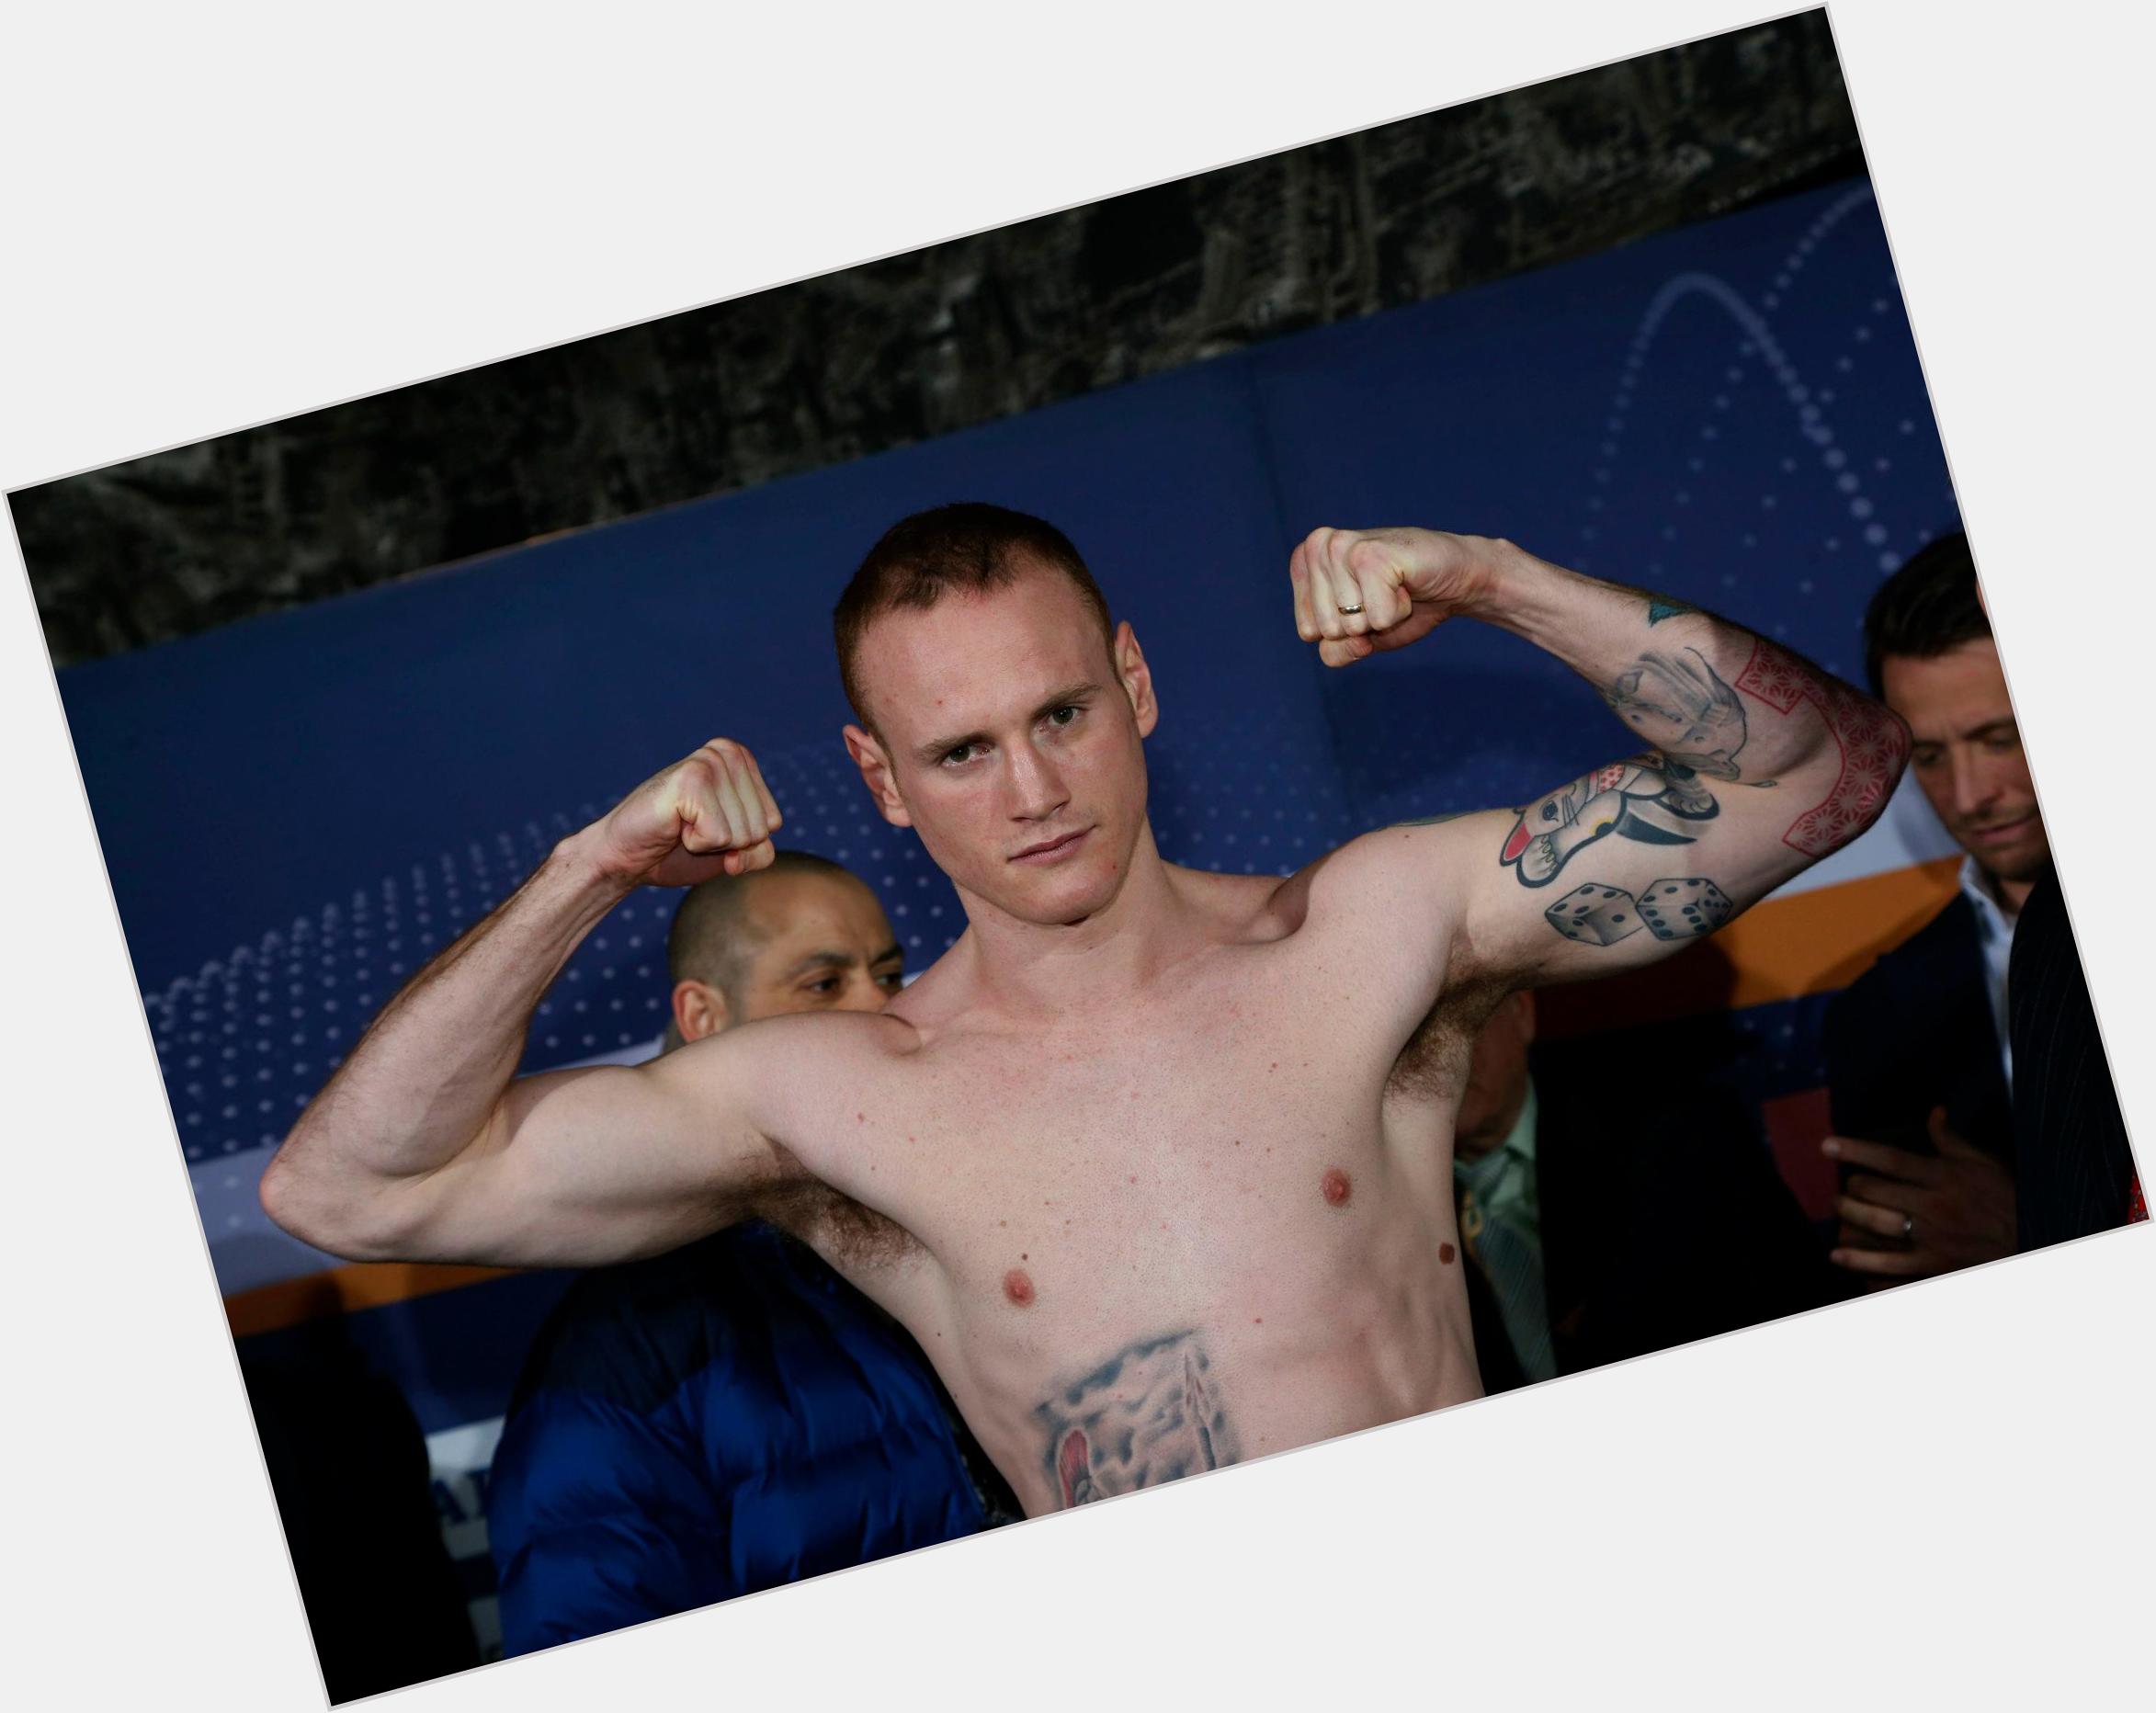 Https://fanpagepress.net/m/G/George Groves Hairstyle 3